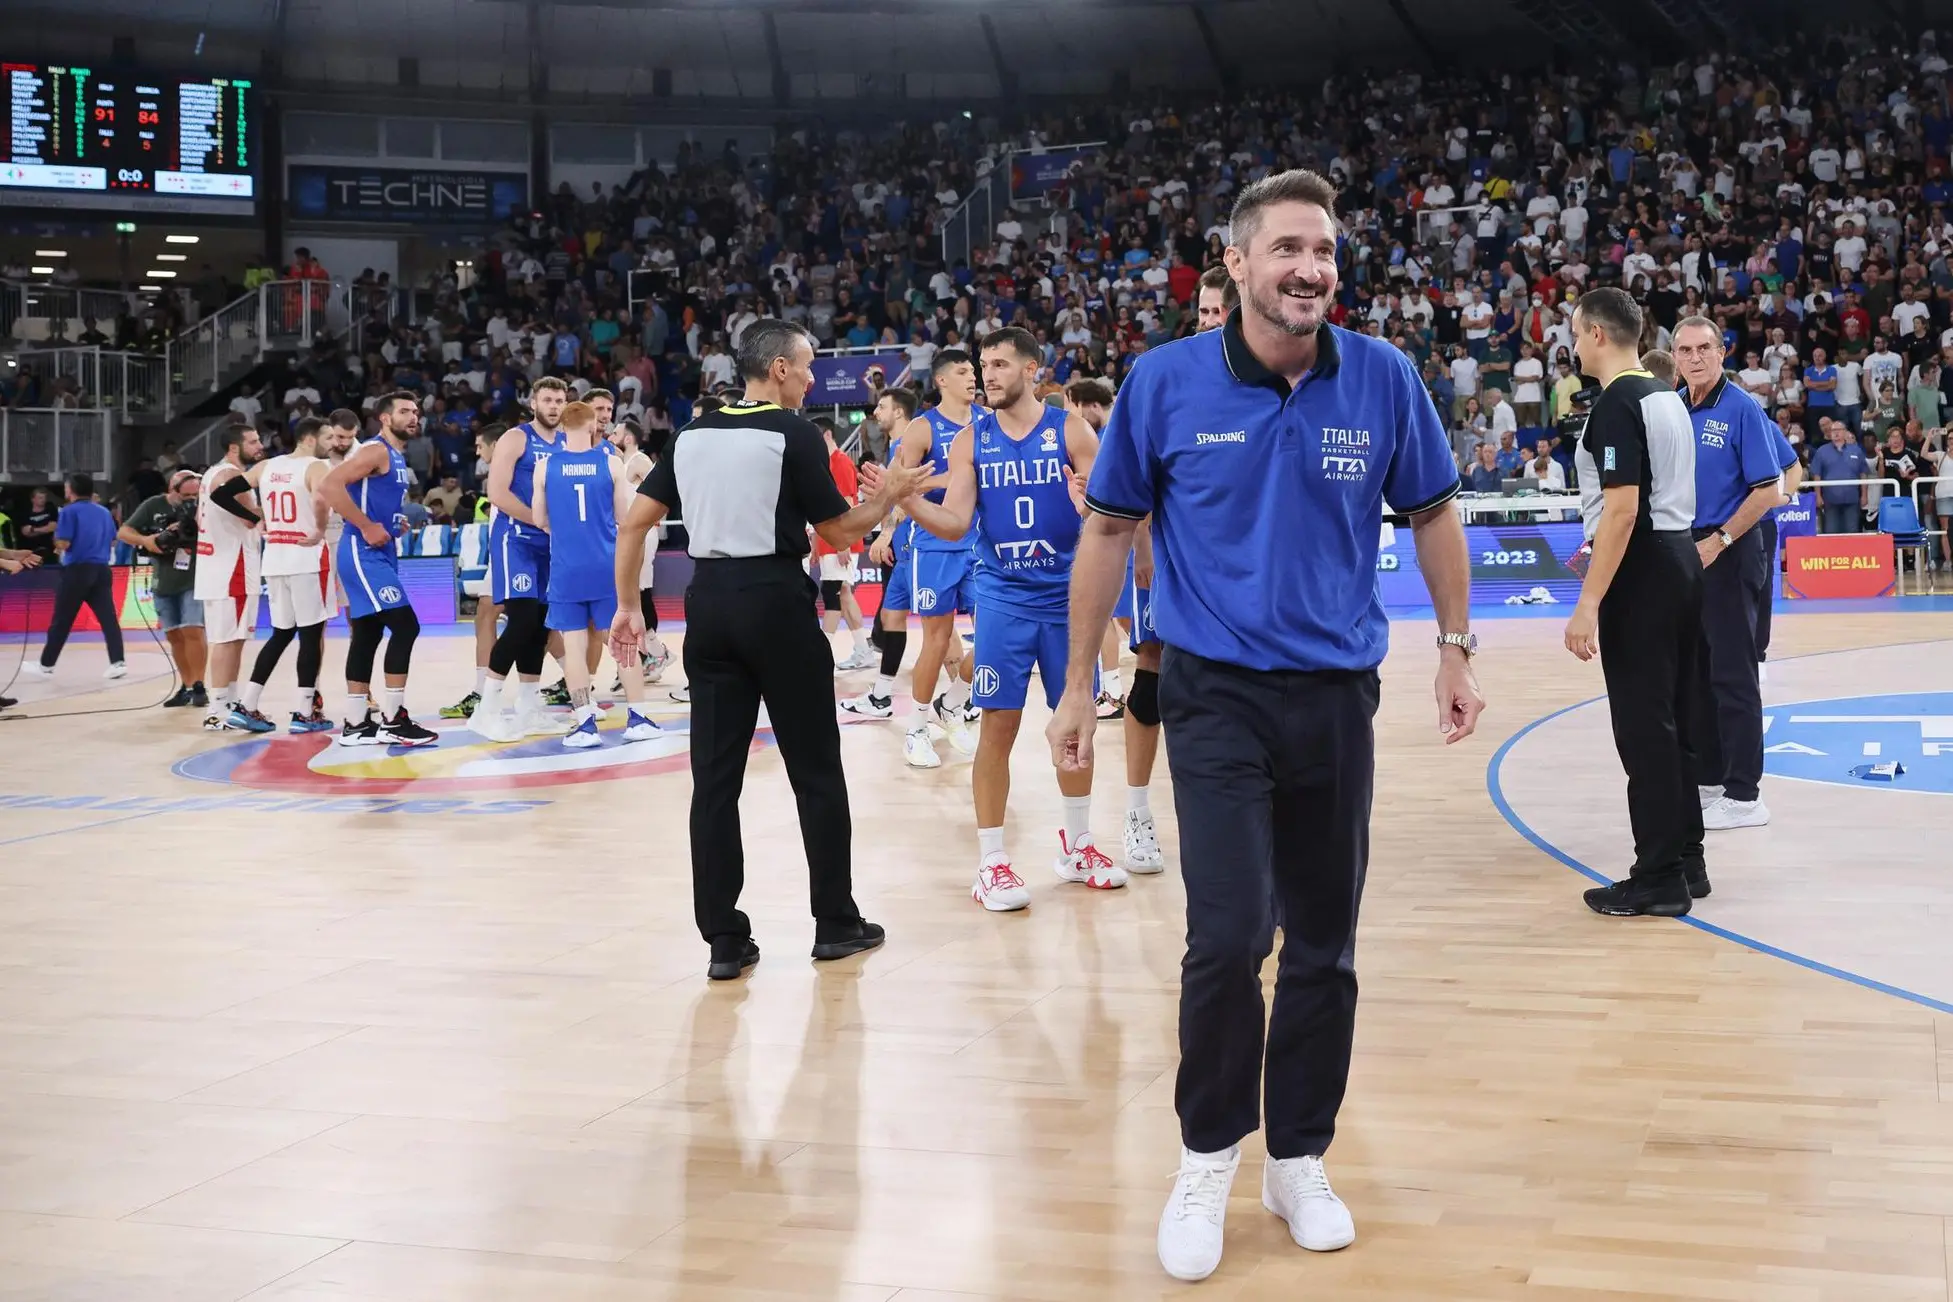 Italy's head coach Gianmarco Pozzecco celebrates the victory at the end of the FIBA World Cup qualifiers basket match Italy vs Georgia at the Palaleonessa Arena in Brescia, Italy, 27 August 2022. ANSA/SIMONE VENEZIA